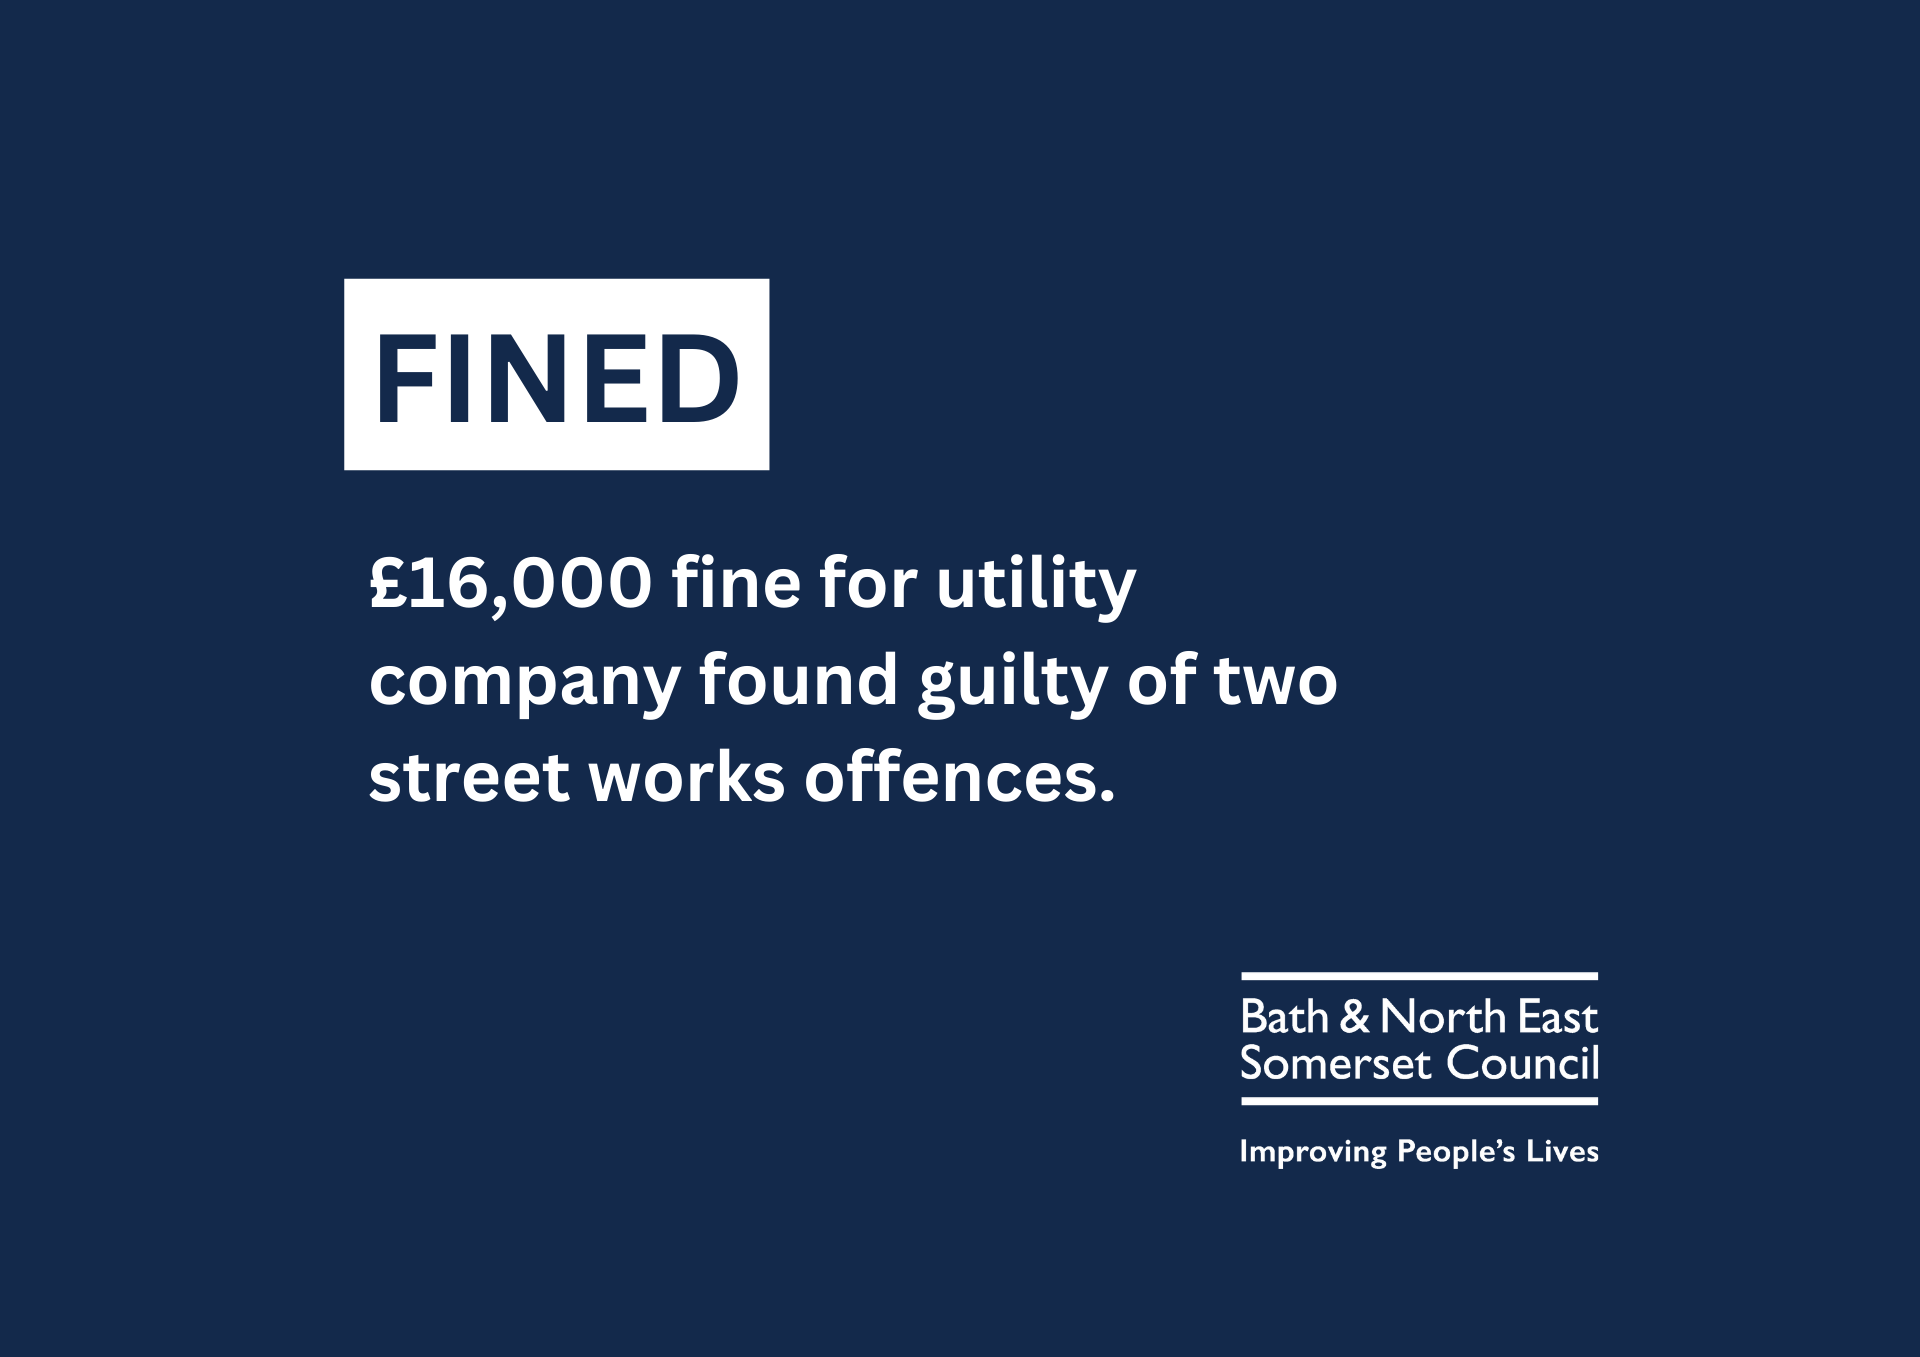 Image containing the text 'FINED' '£16,000 fine for utility company found guilty of two street works offences.'